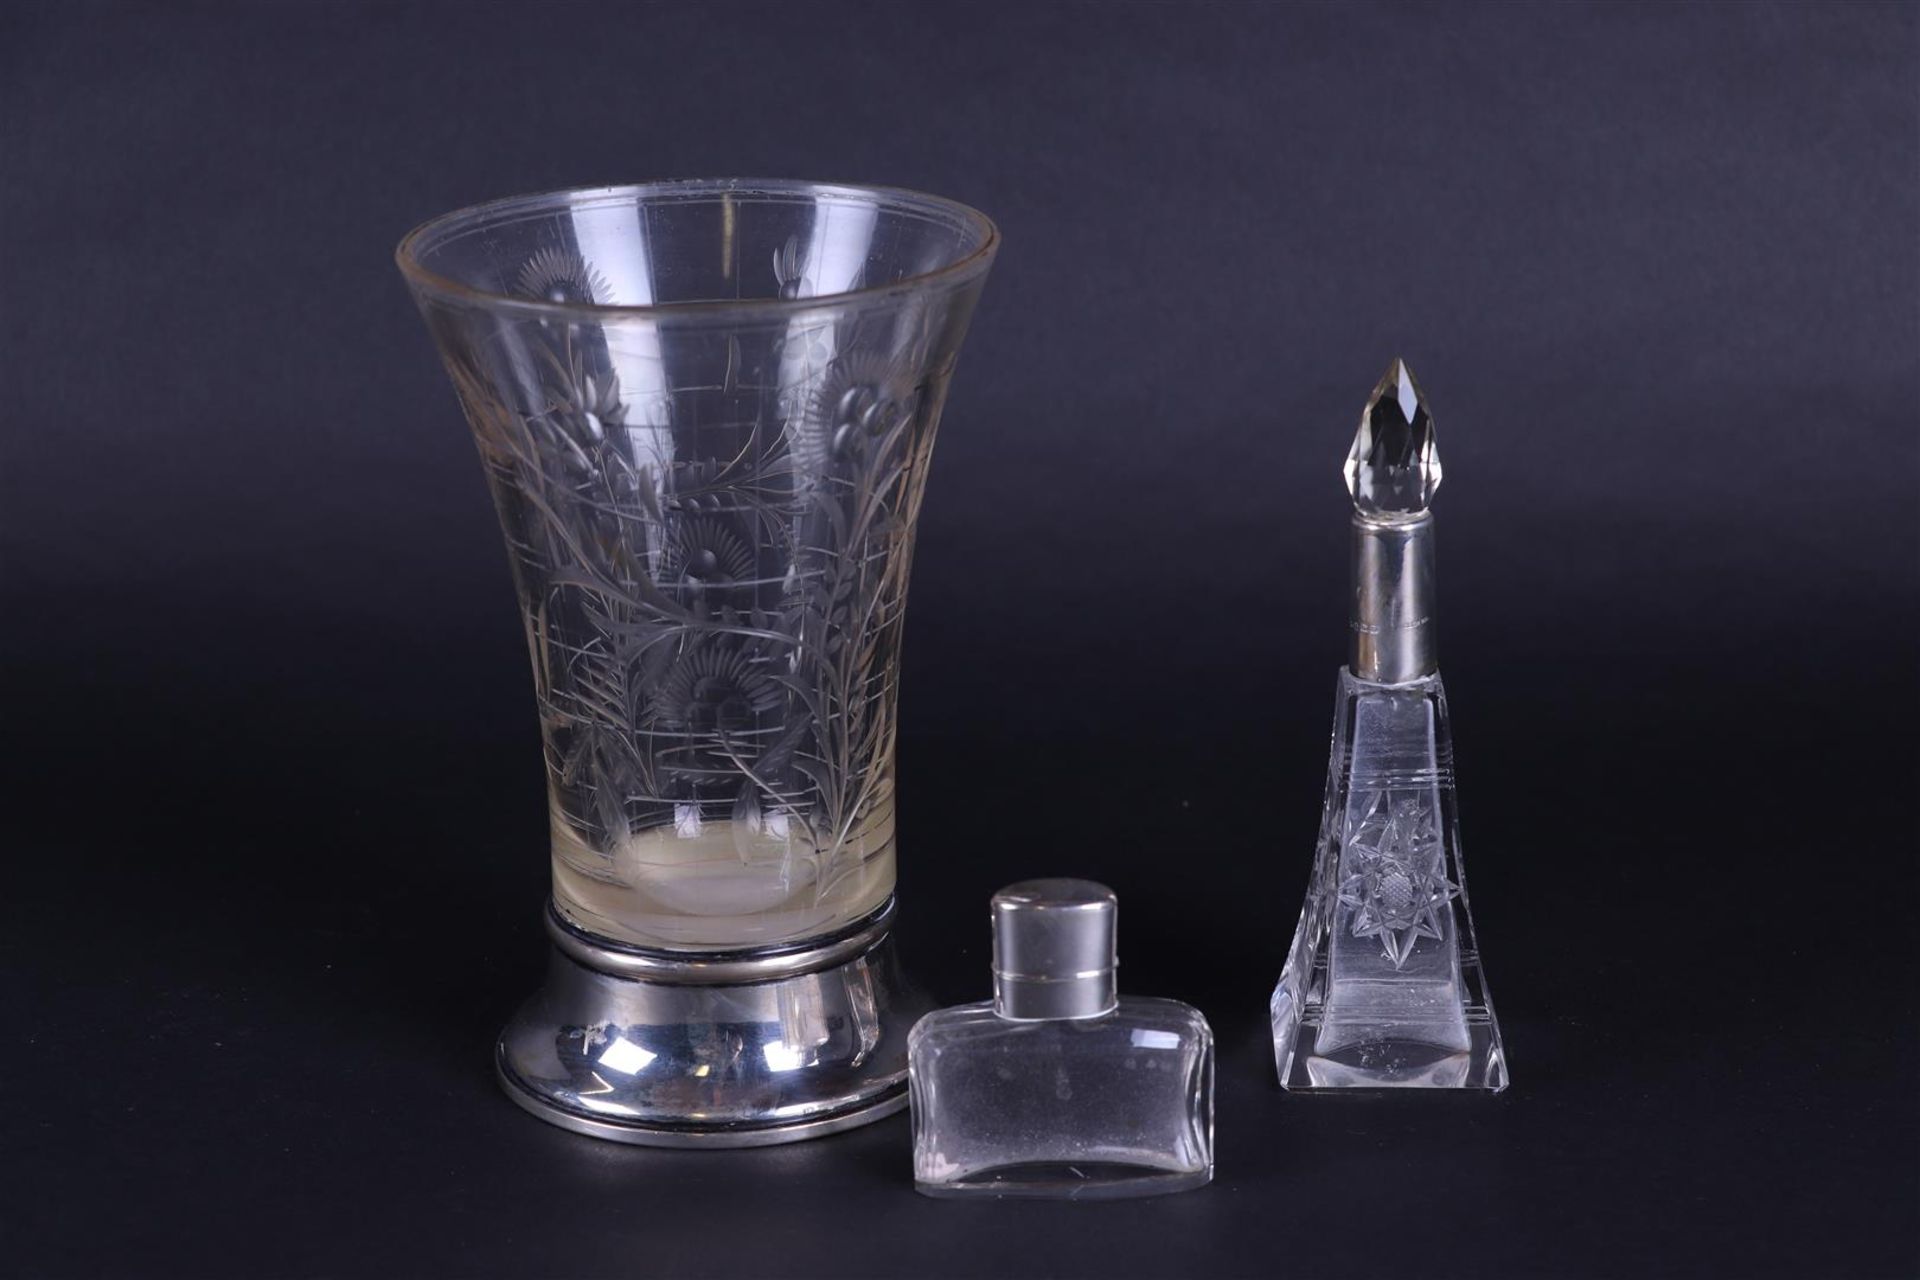 A lot consisting of 3 glass objects with silver frames, including a perfume bottle.